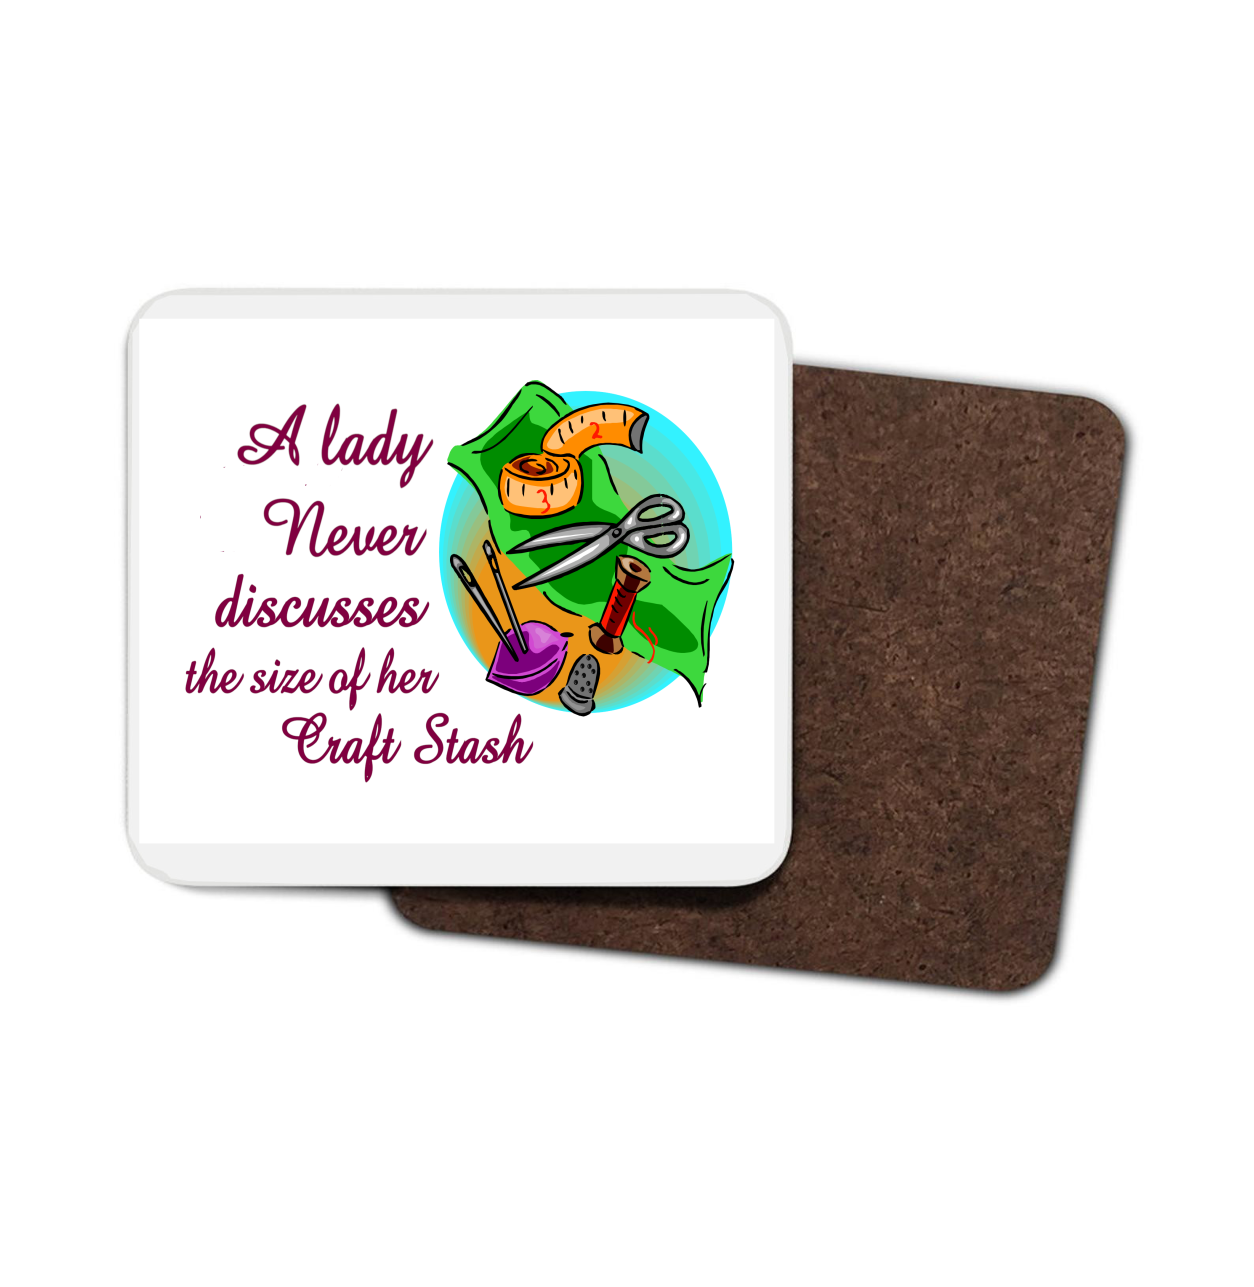 A Lady Never Discusses The Size Of Her ... Hardboard Coaster